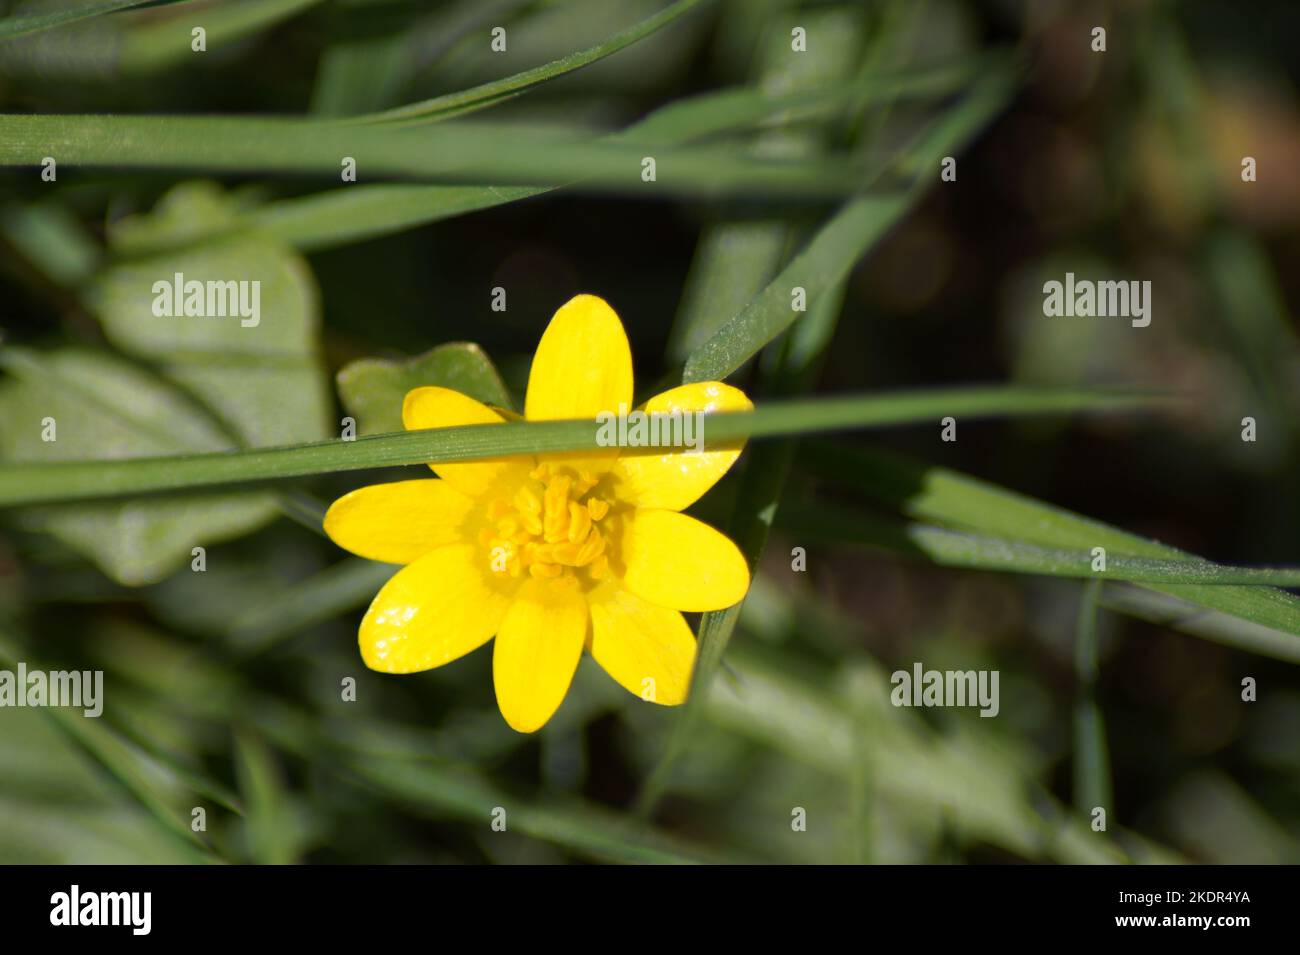 yellow flower of the buttercup blooms in the garden Stock Photo